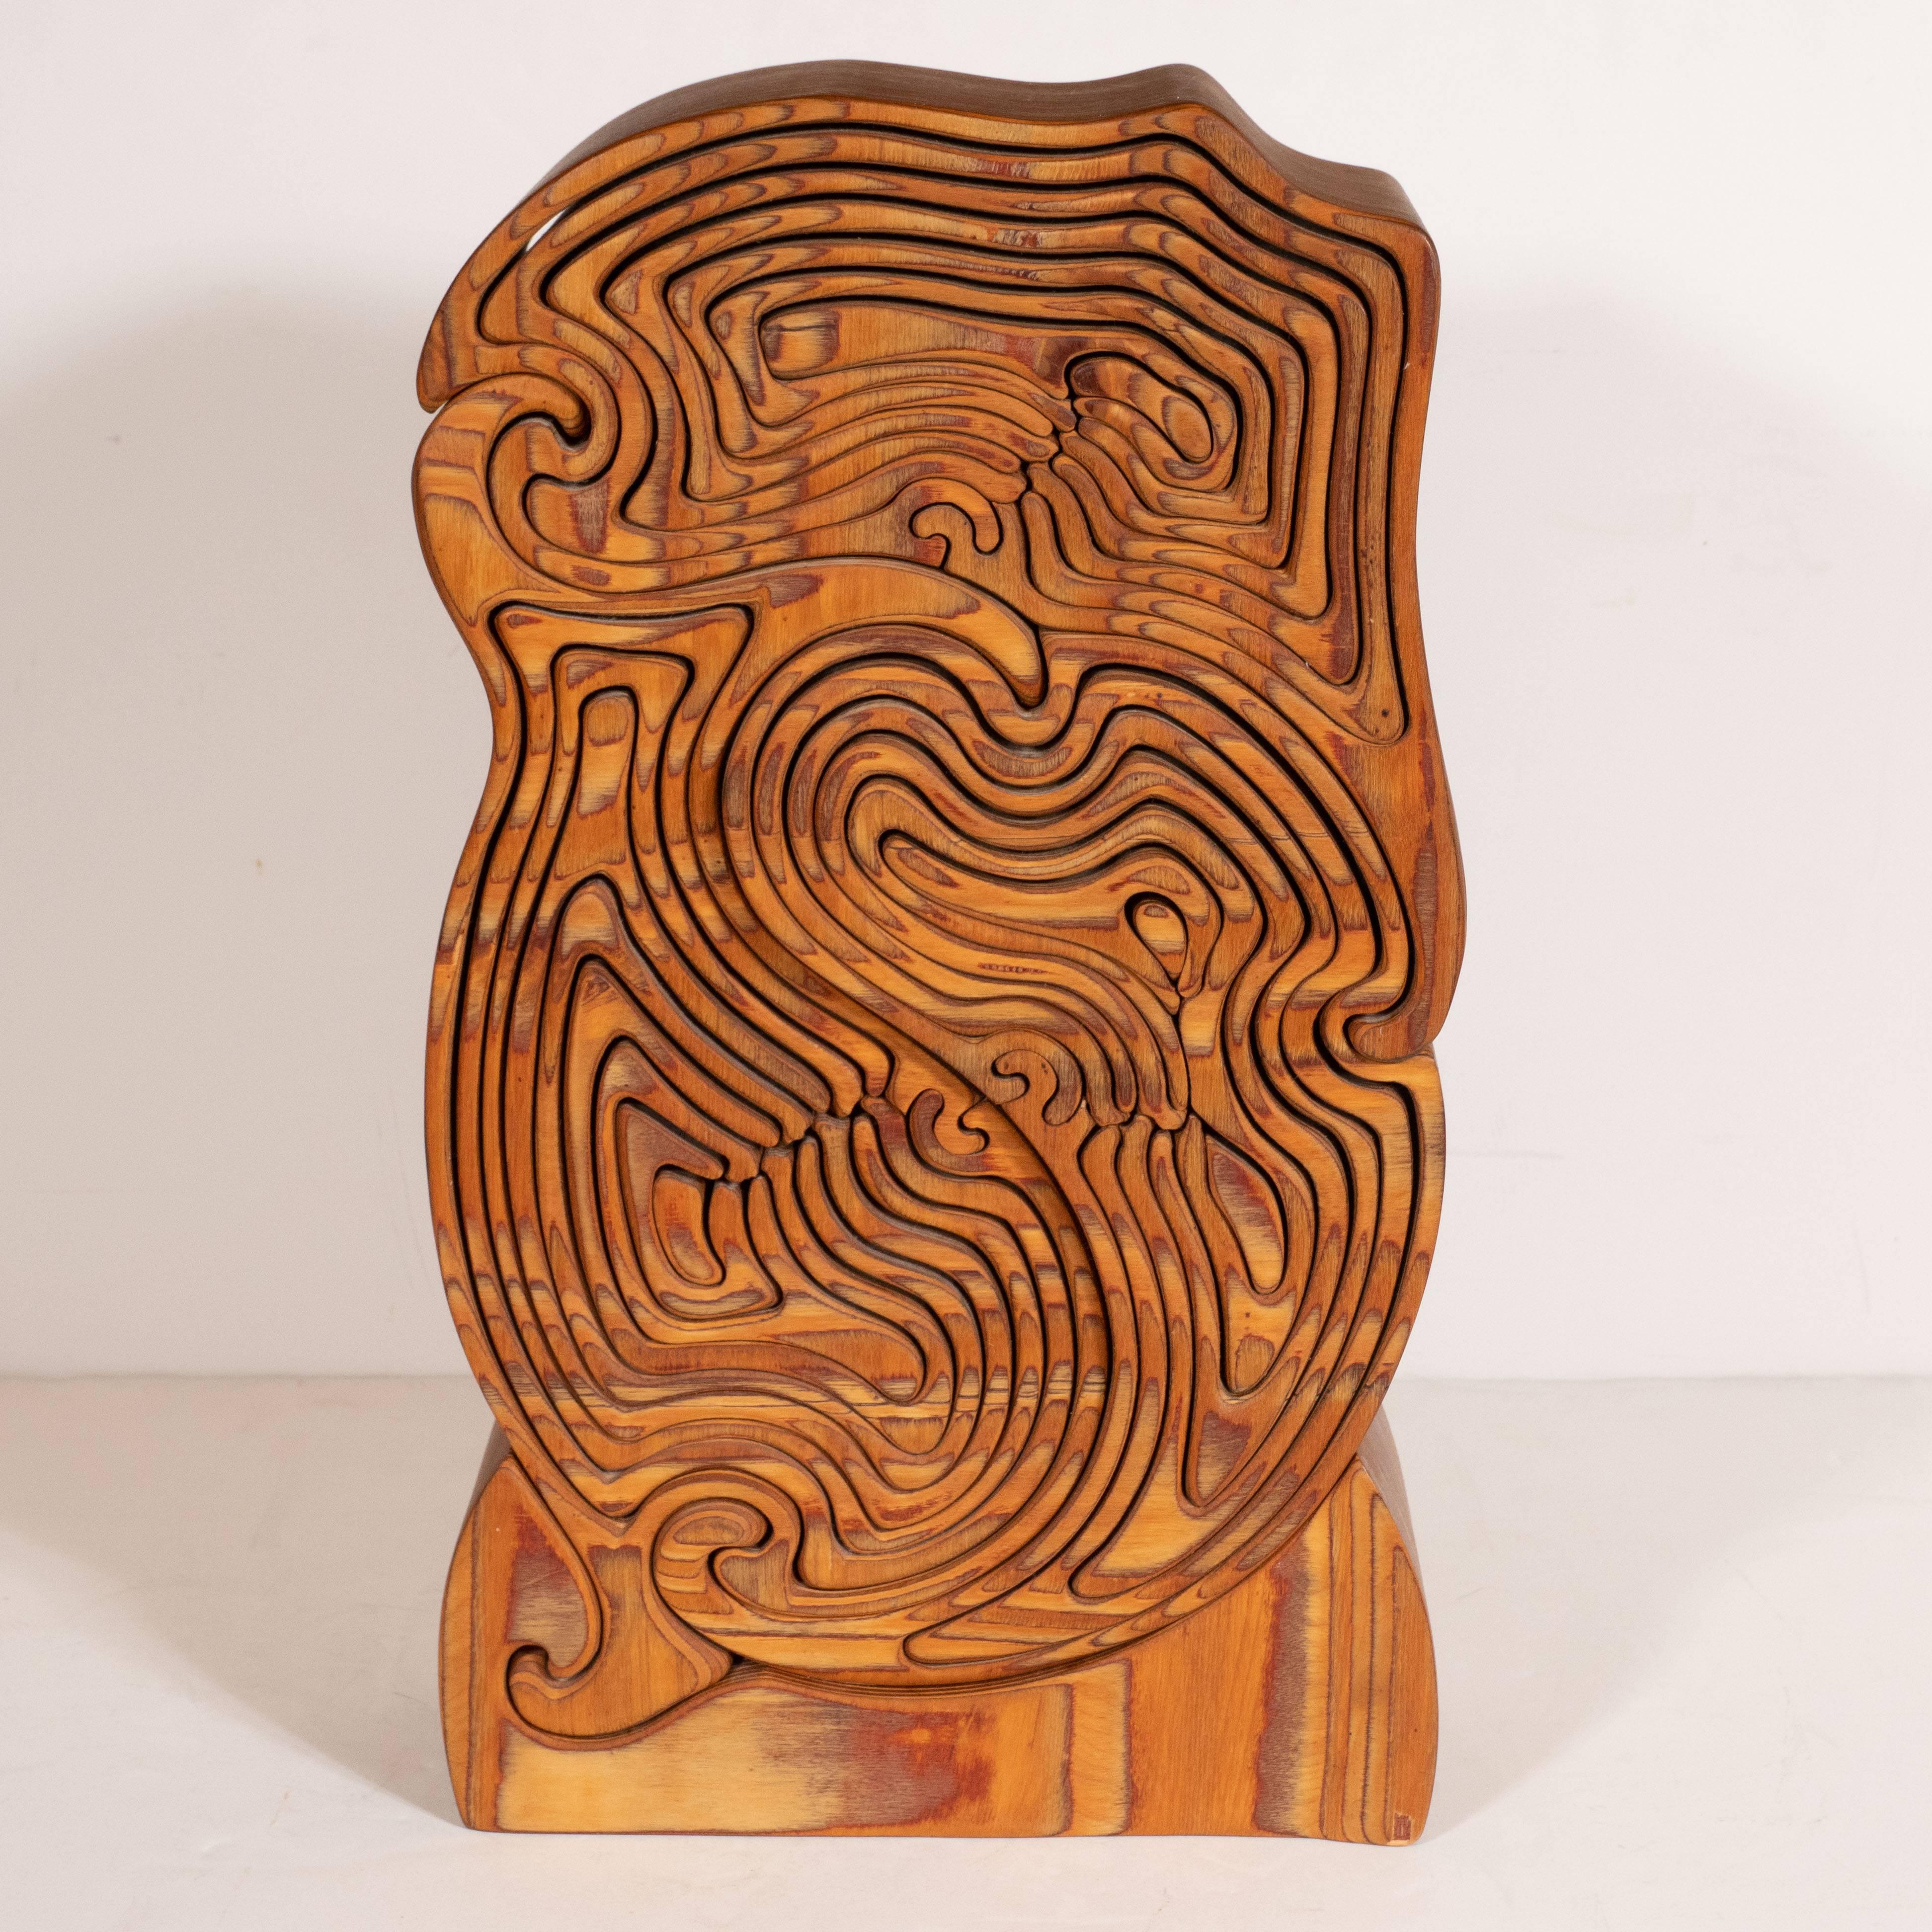 This kinetic and impeccably crafted olive wood sculpture was realized, by hand, in the United States, circa 1970. It offers a an abundance of intertwining curvilinear forms that fit together, like abstracted nesting dolls. The dimensional form